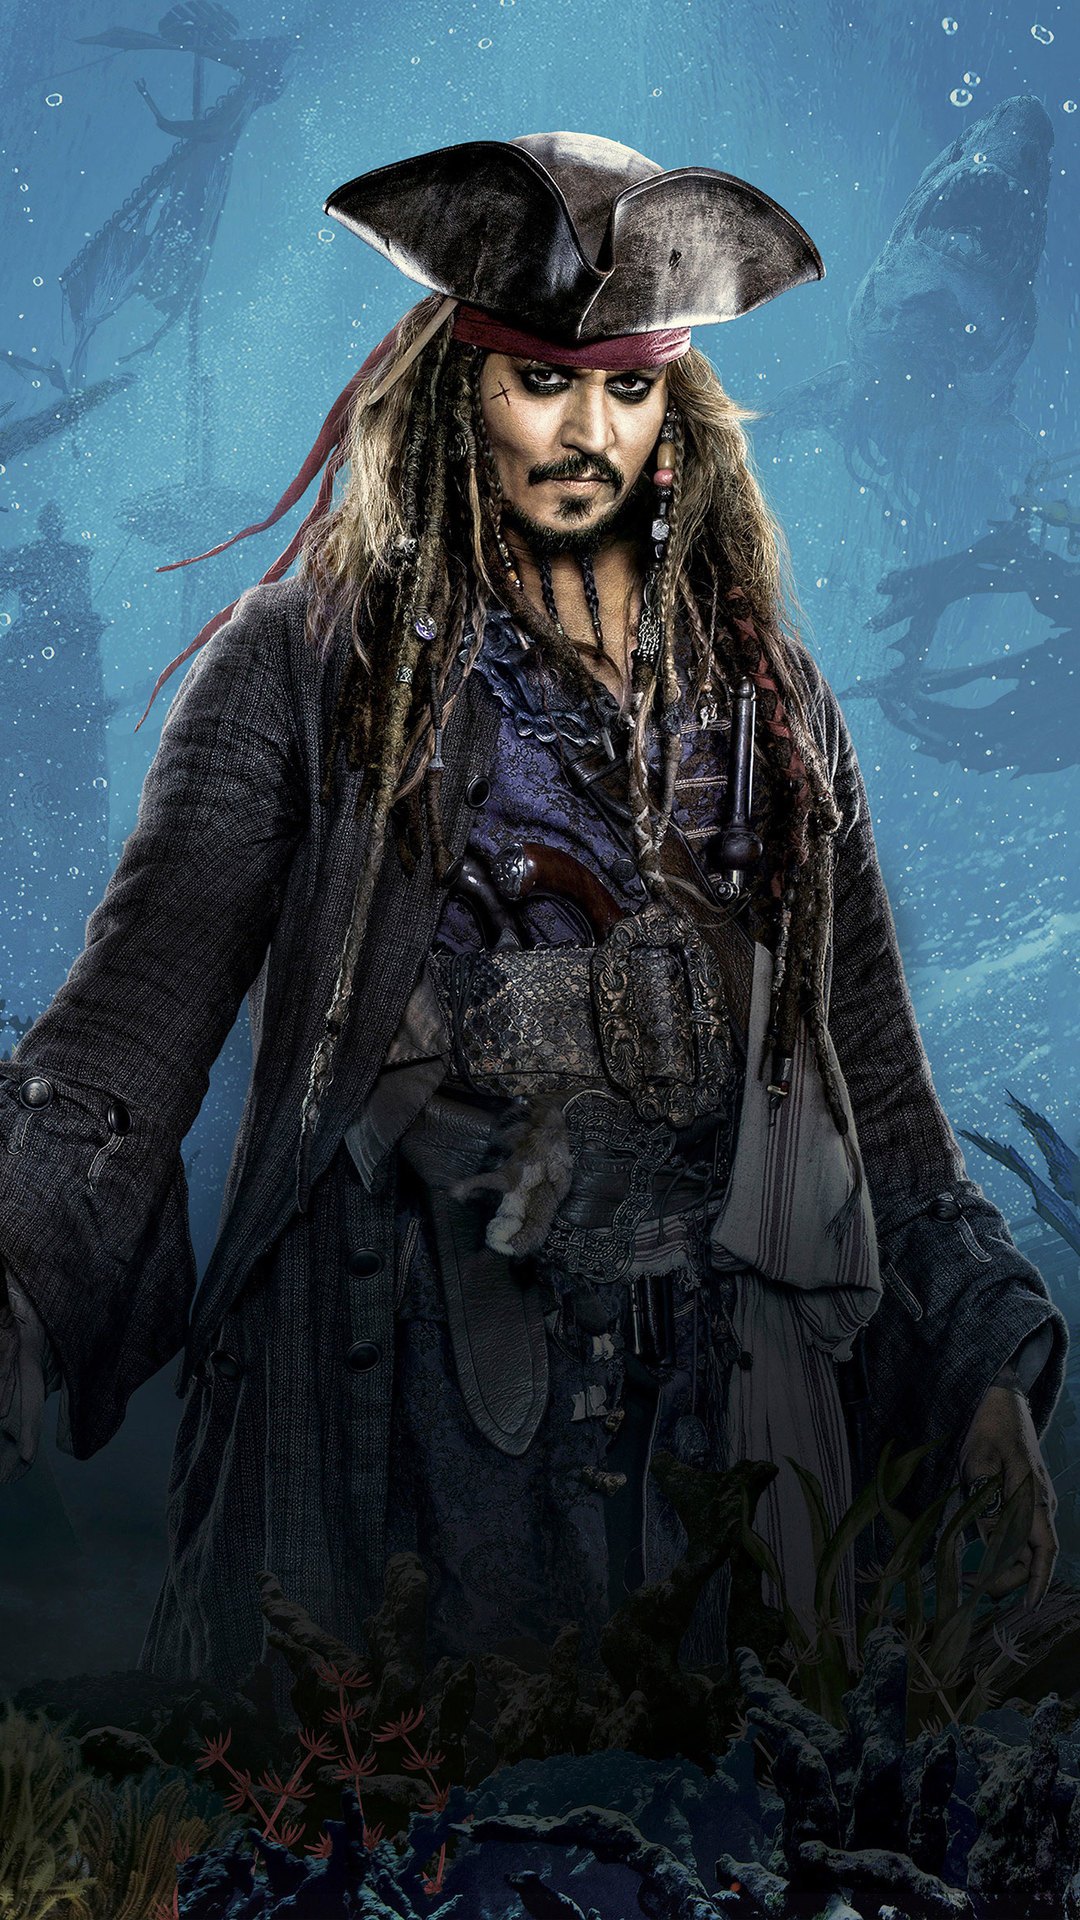 𝑱𝒐𝒉𝒏𝒏𝒚 𝑫𝒆𝒑𝒑 - 𝑳𝒐𝒄𝒌𝒔𝒄𝒓𝒆𝒆𝒏 - Pirates Of The Caribbean Dead Men Tell No Tales Javier , HD Wallpaper & Backgrounds